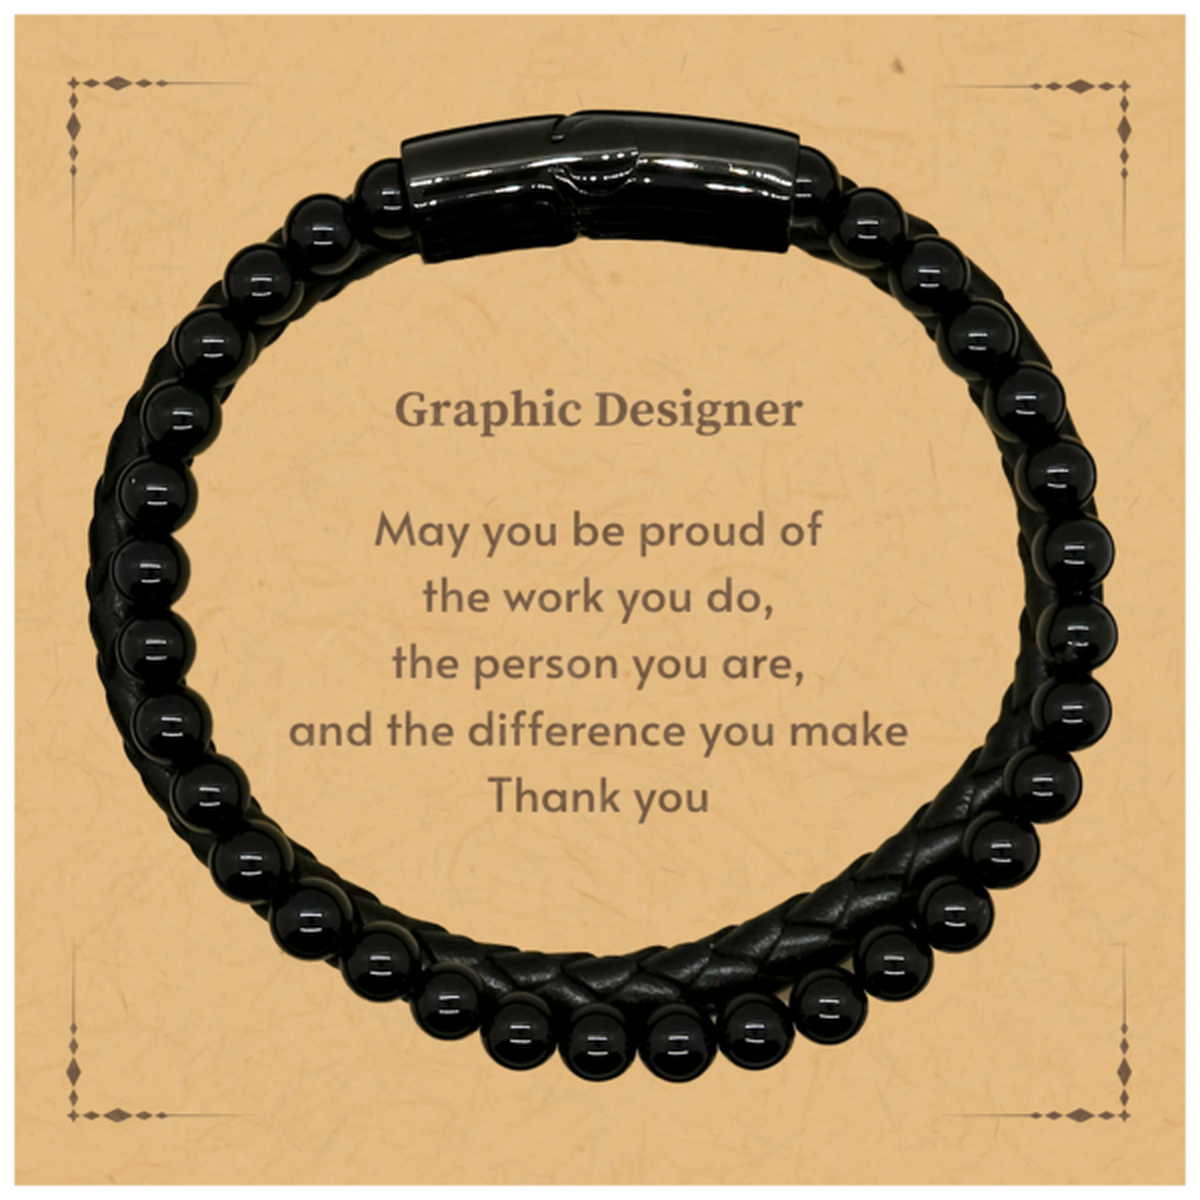 Heartwarming Stone Leather Bracelets Retirement Coworkers Gifts for Graphic Designer, Graphic Designer May You be proud of the work you do, the person you are Gifts for Boss Men Women Friends